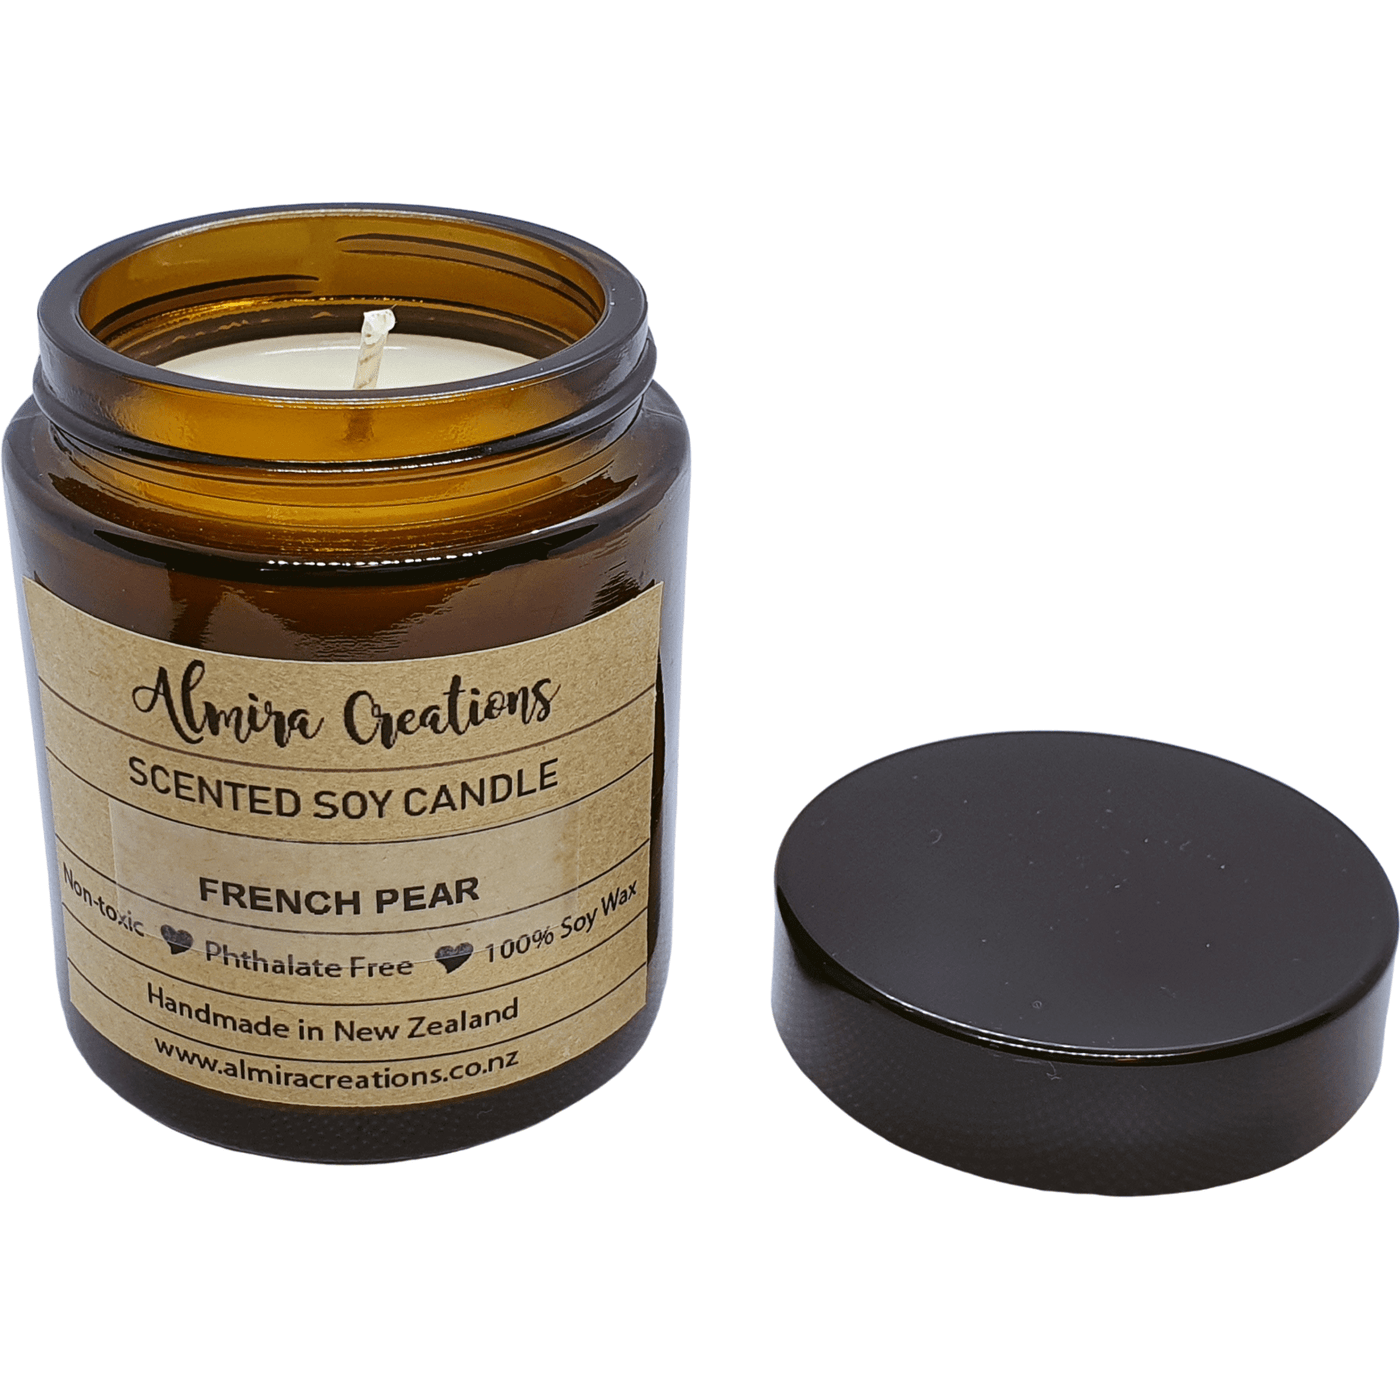 French Pear - Scented Soy Candle - Almira Creations